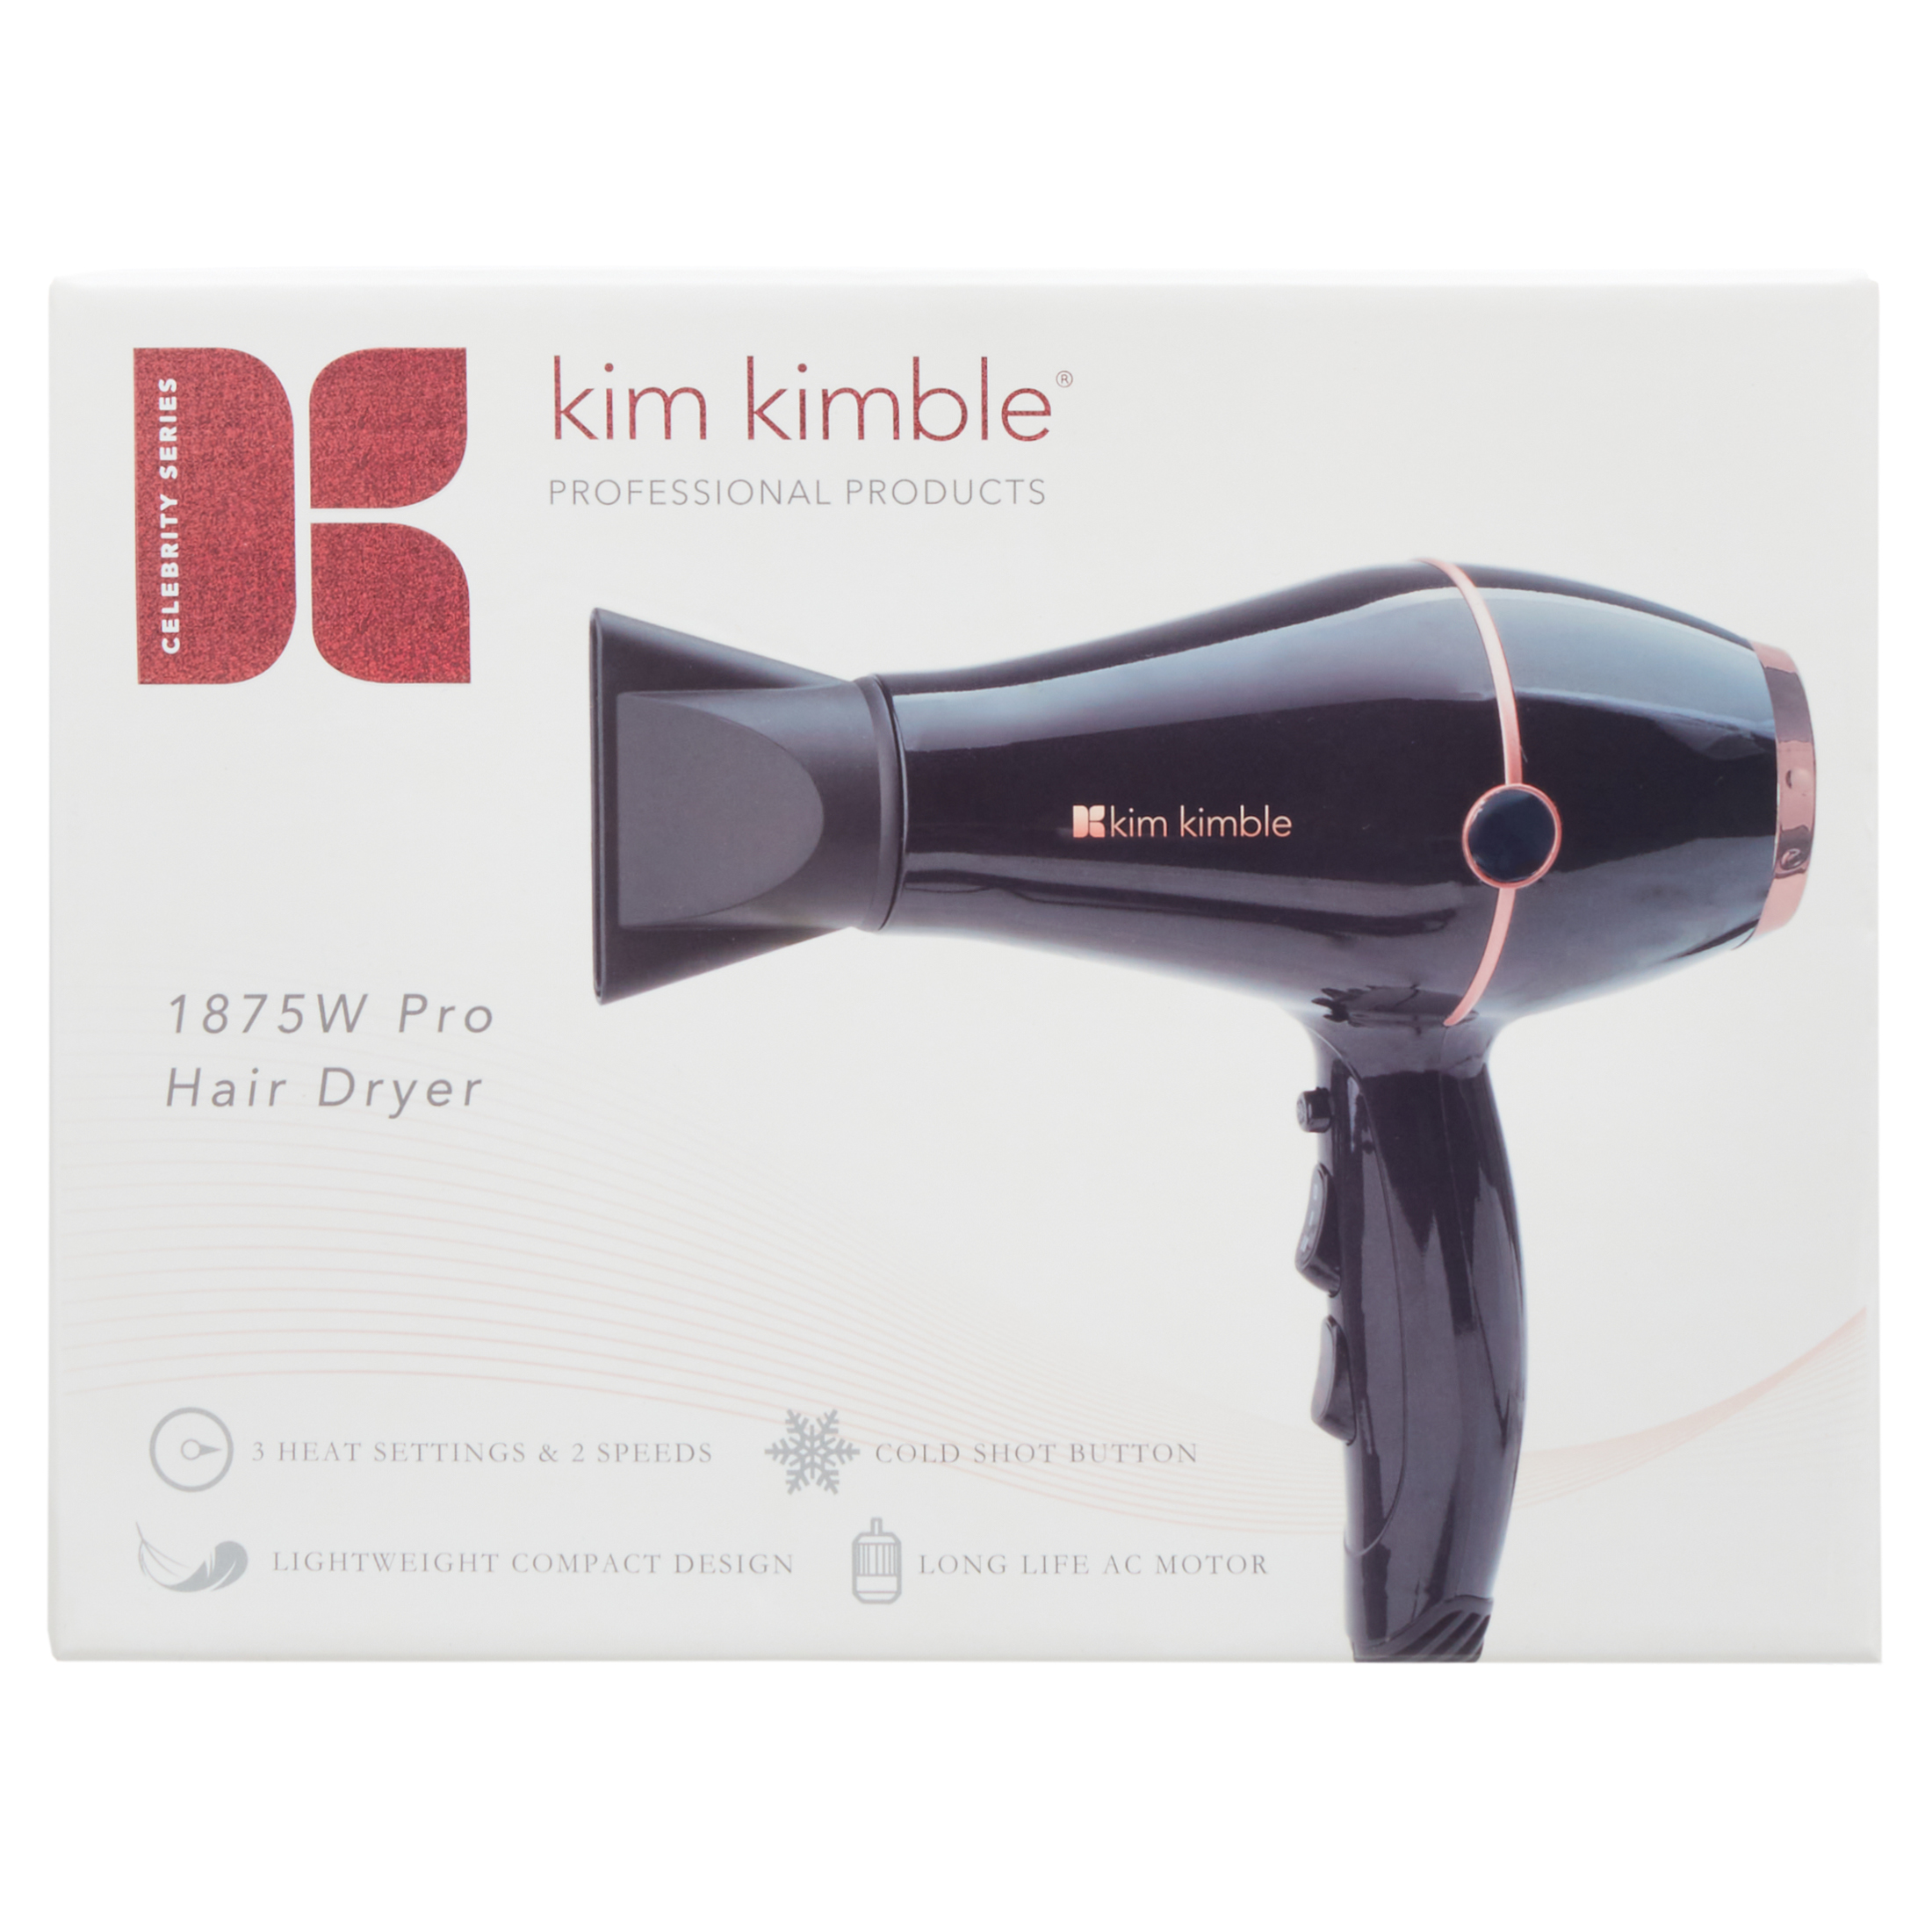 Kim Kimble Celebrity Series Ultra-Light 1875W Pro Hair Dryer, Black & Rose Gold with Concentrator and Diffuser - image 3 of 14